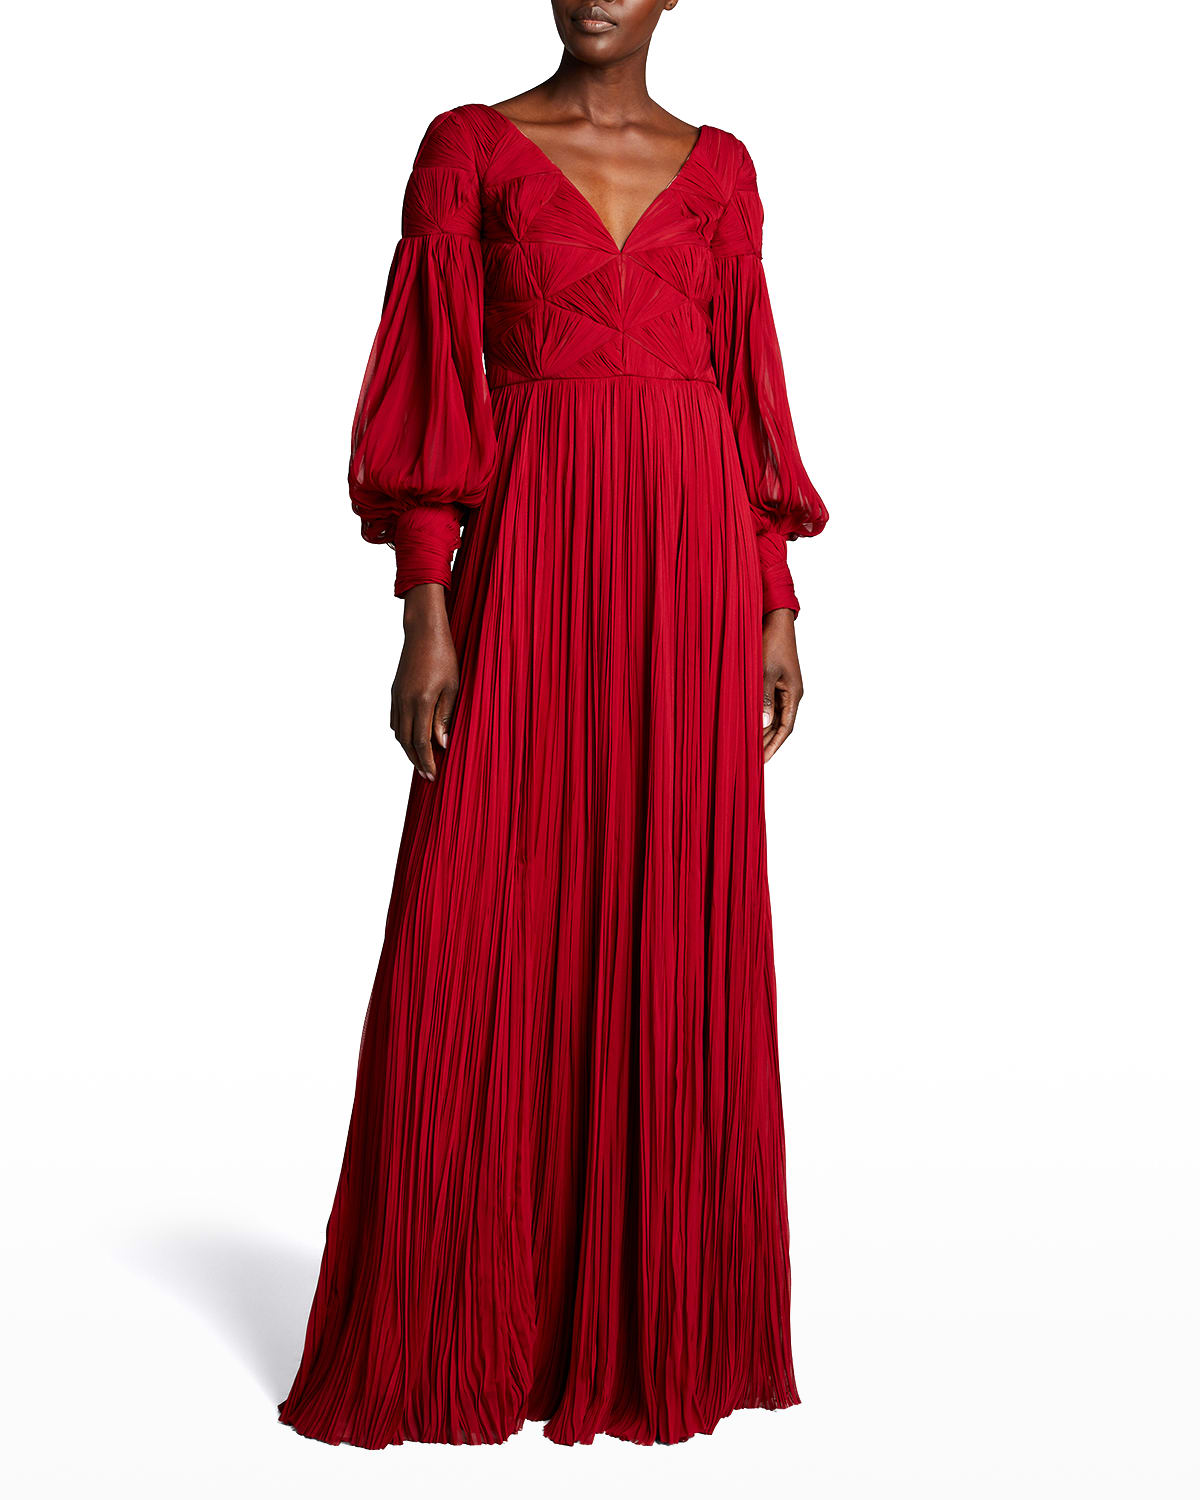 Red Evening Gown | Neiman Marcus